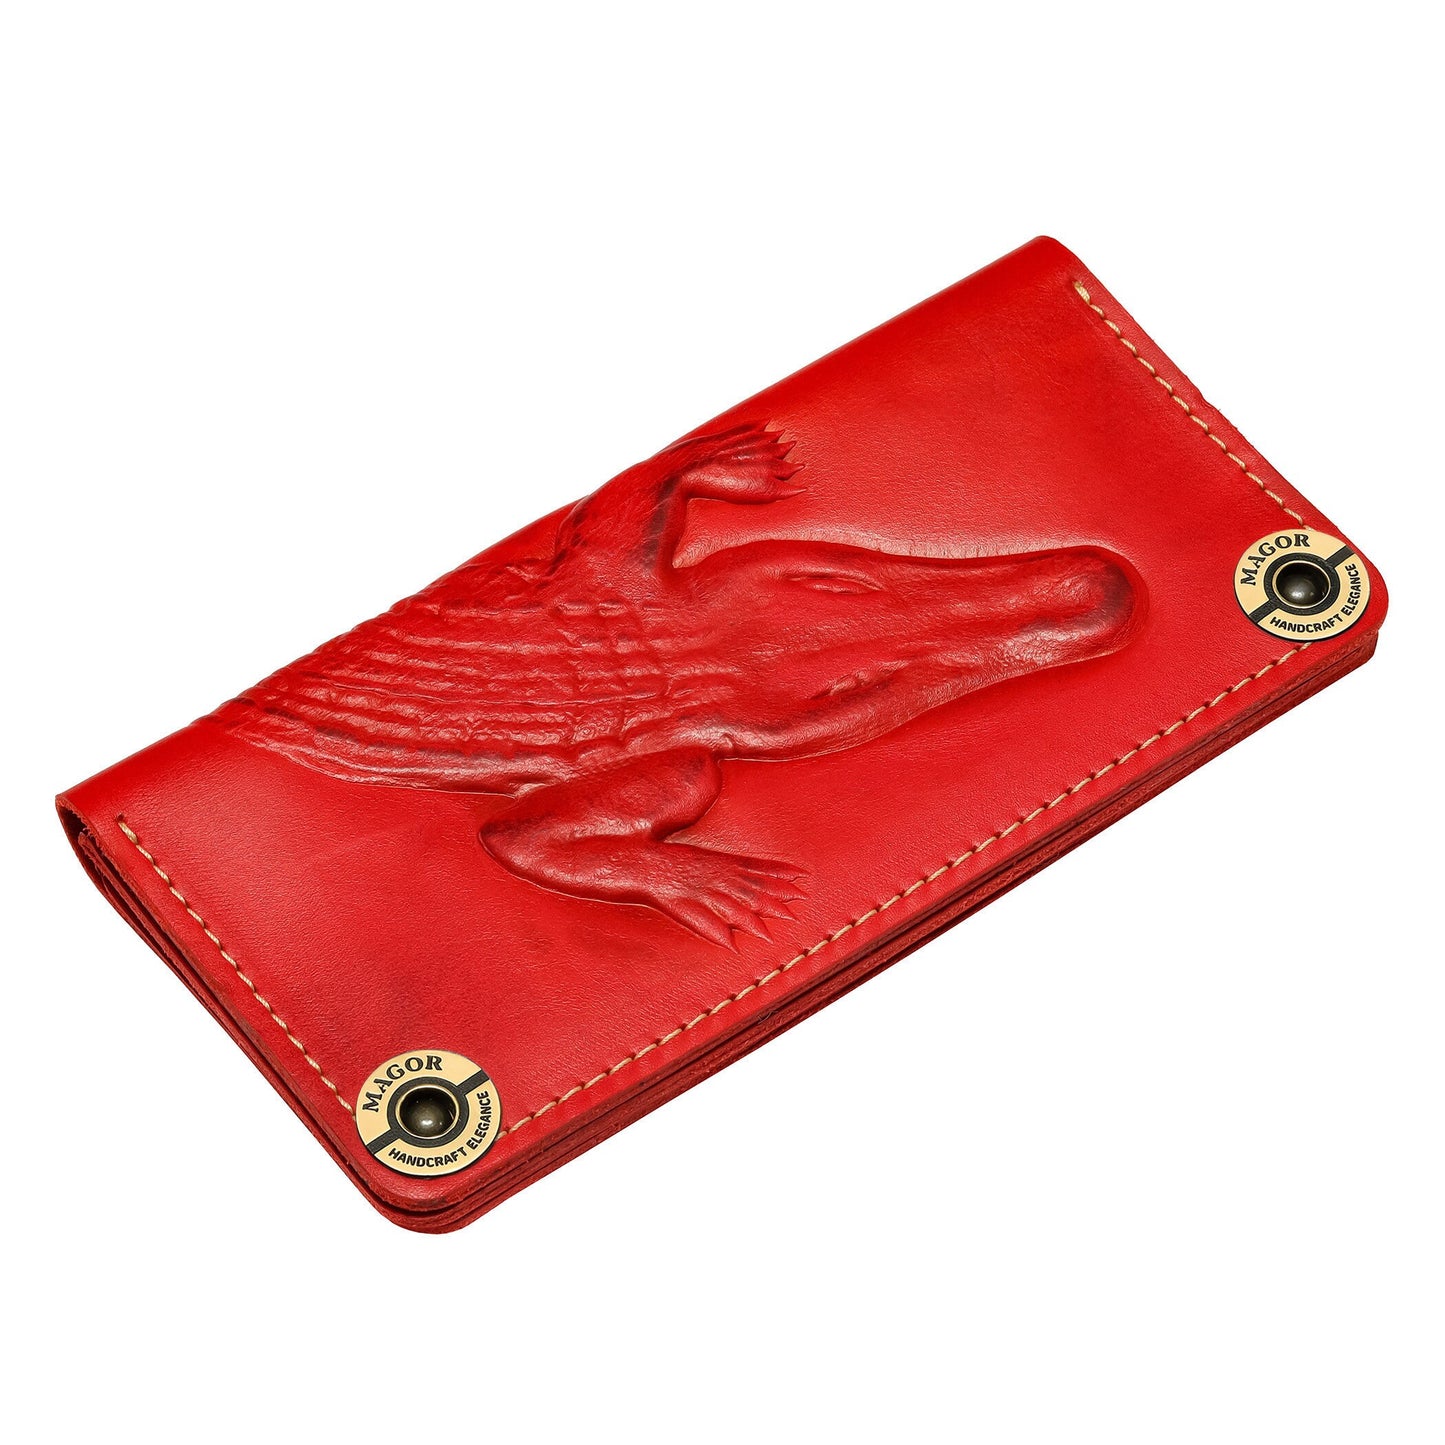 Women's Wallet | Long Leather Wallet With Card Holder | Zip Coin Pocket | Genuine Leather Wallet | gift ideas